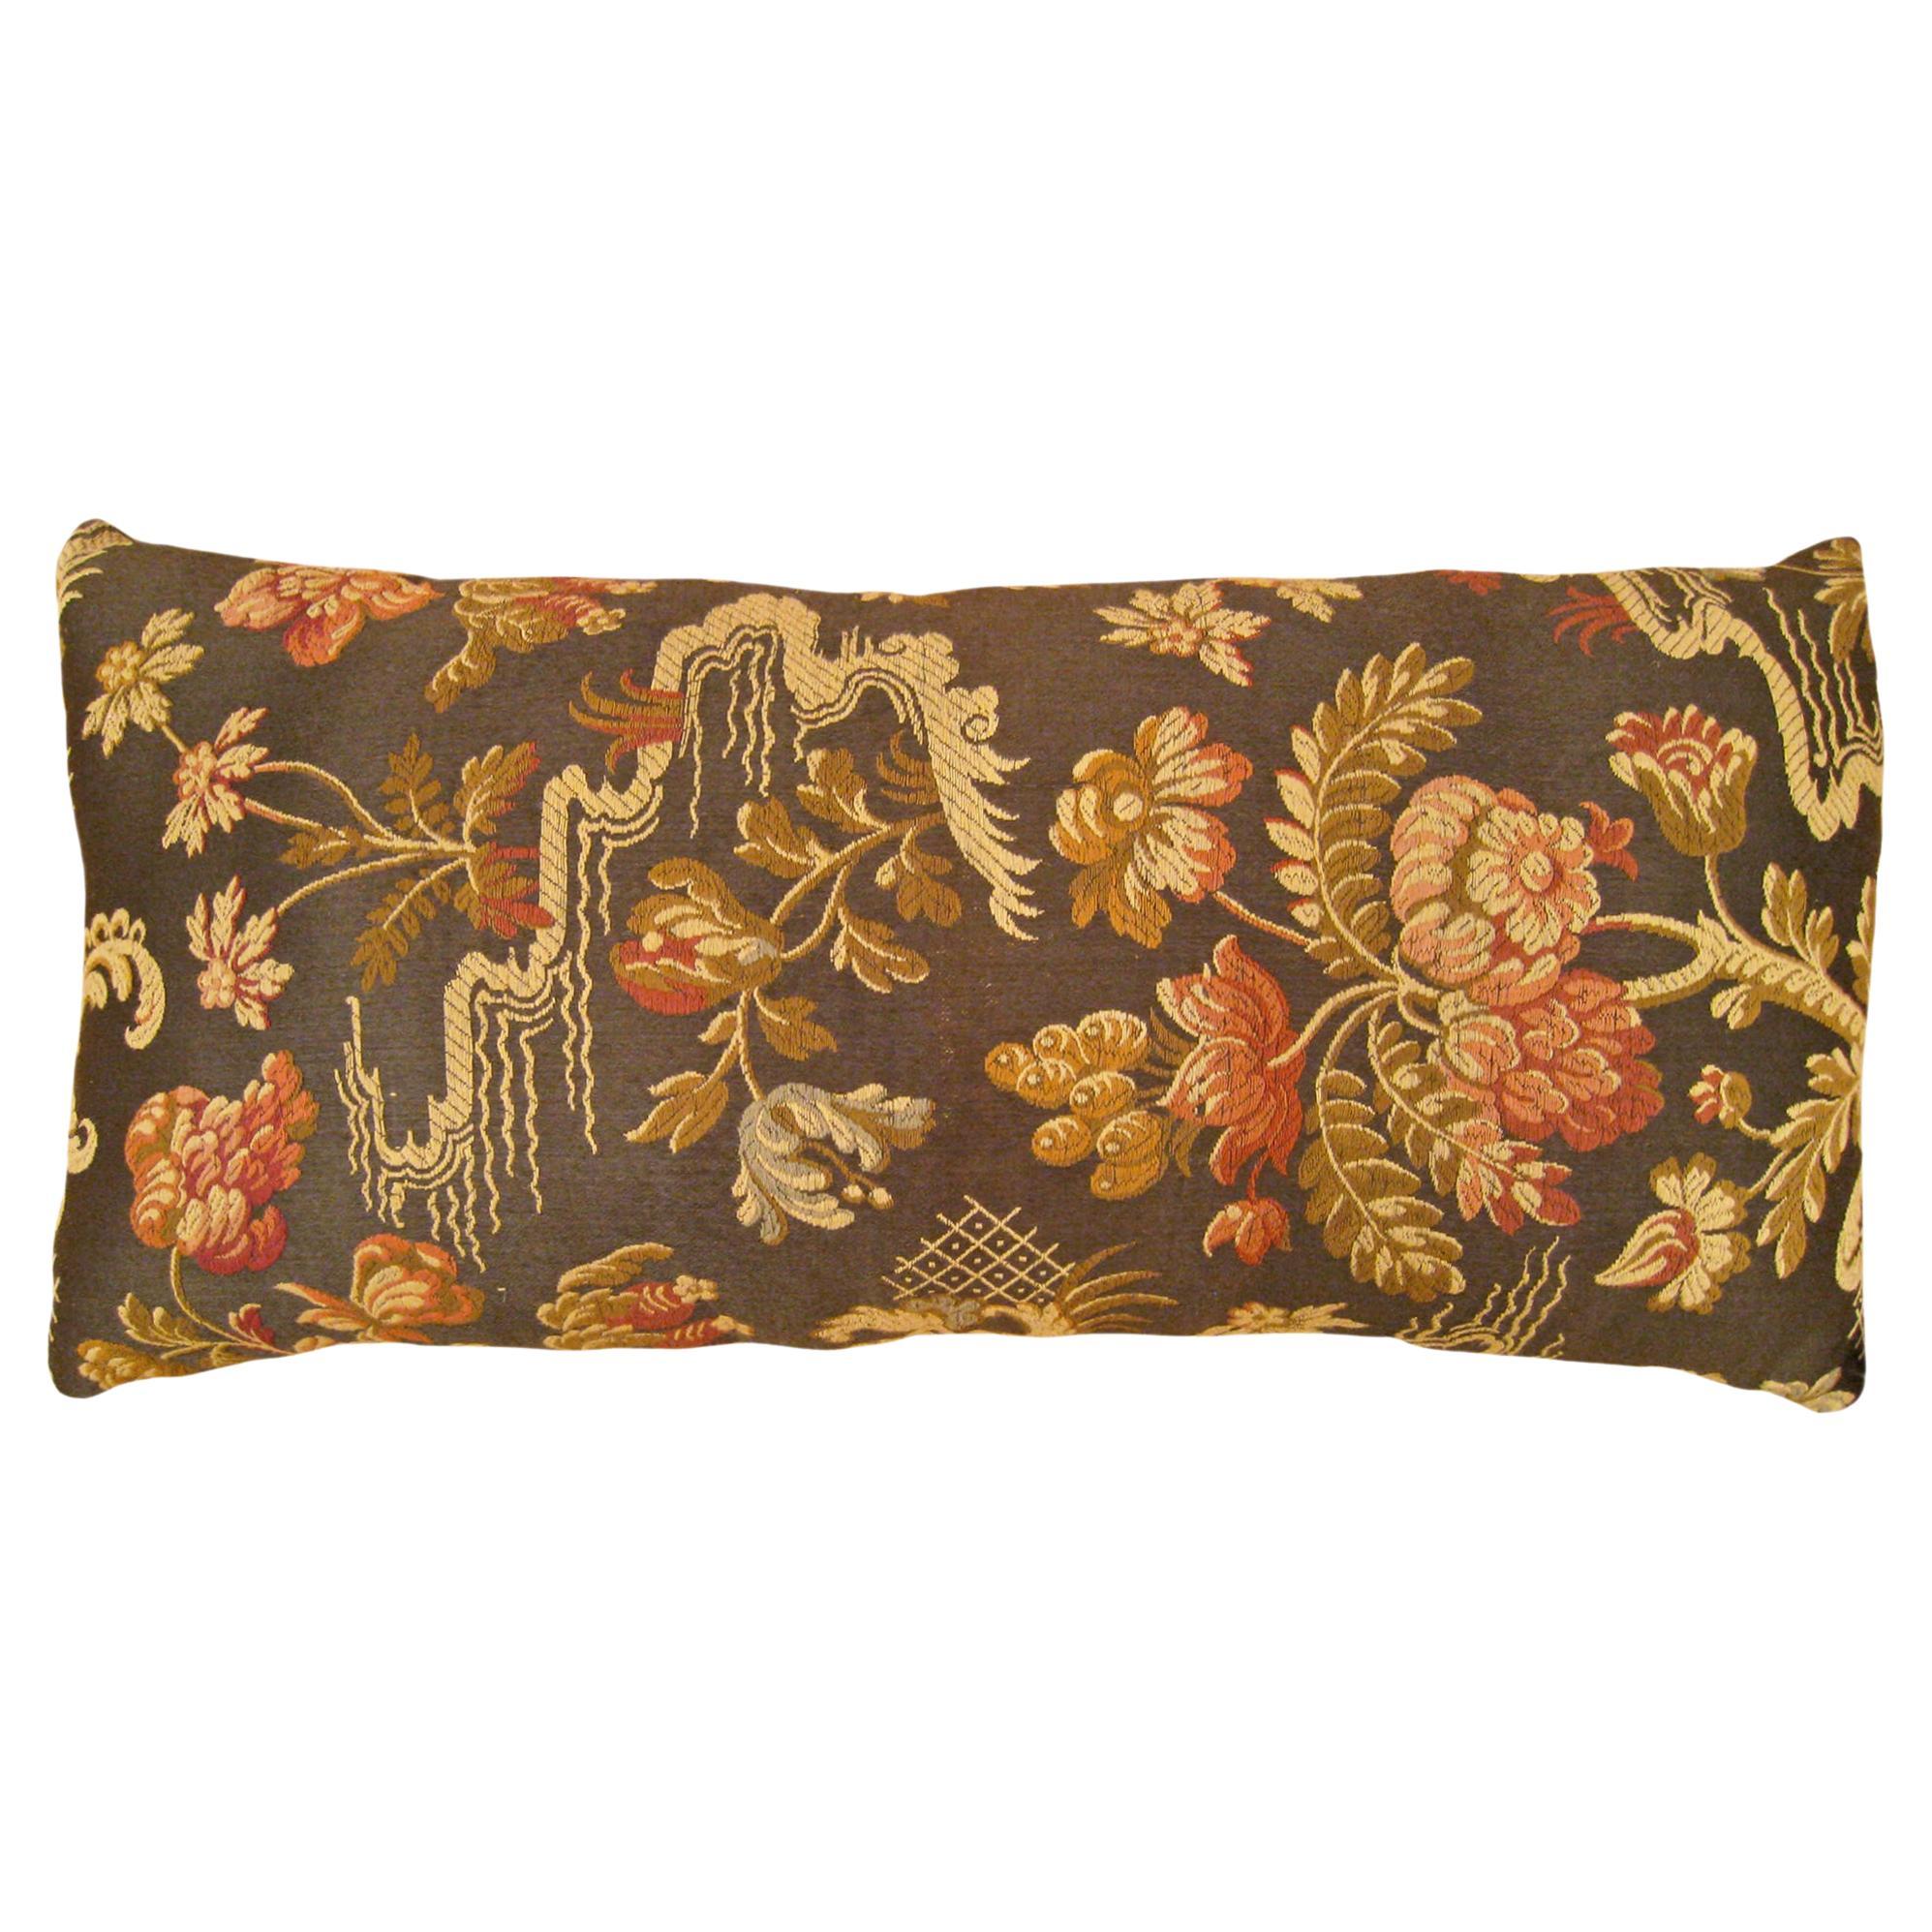 Decorative Antique Jacquard Tapestry Pillow with A Garden Design Allover For Sale